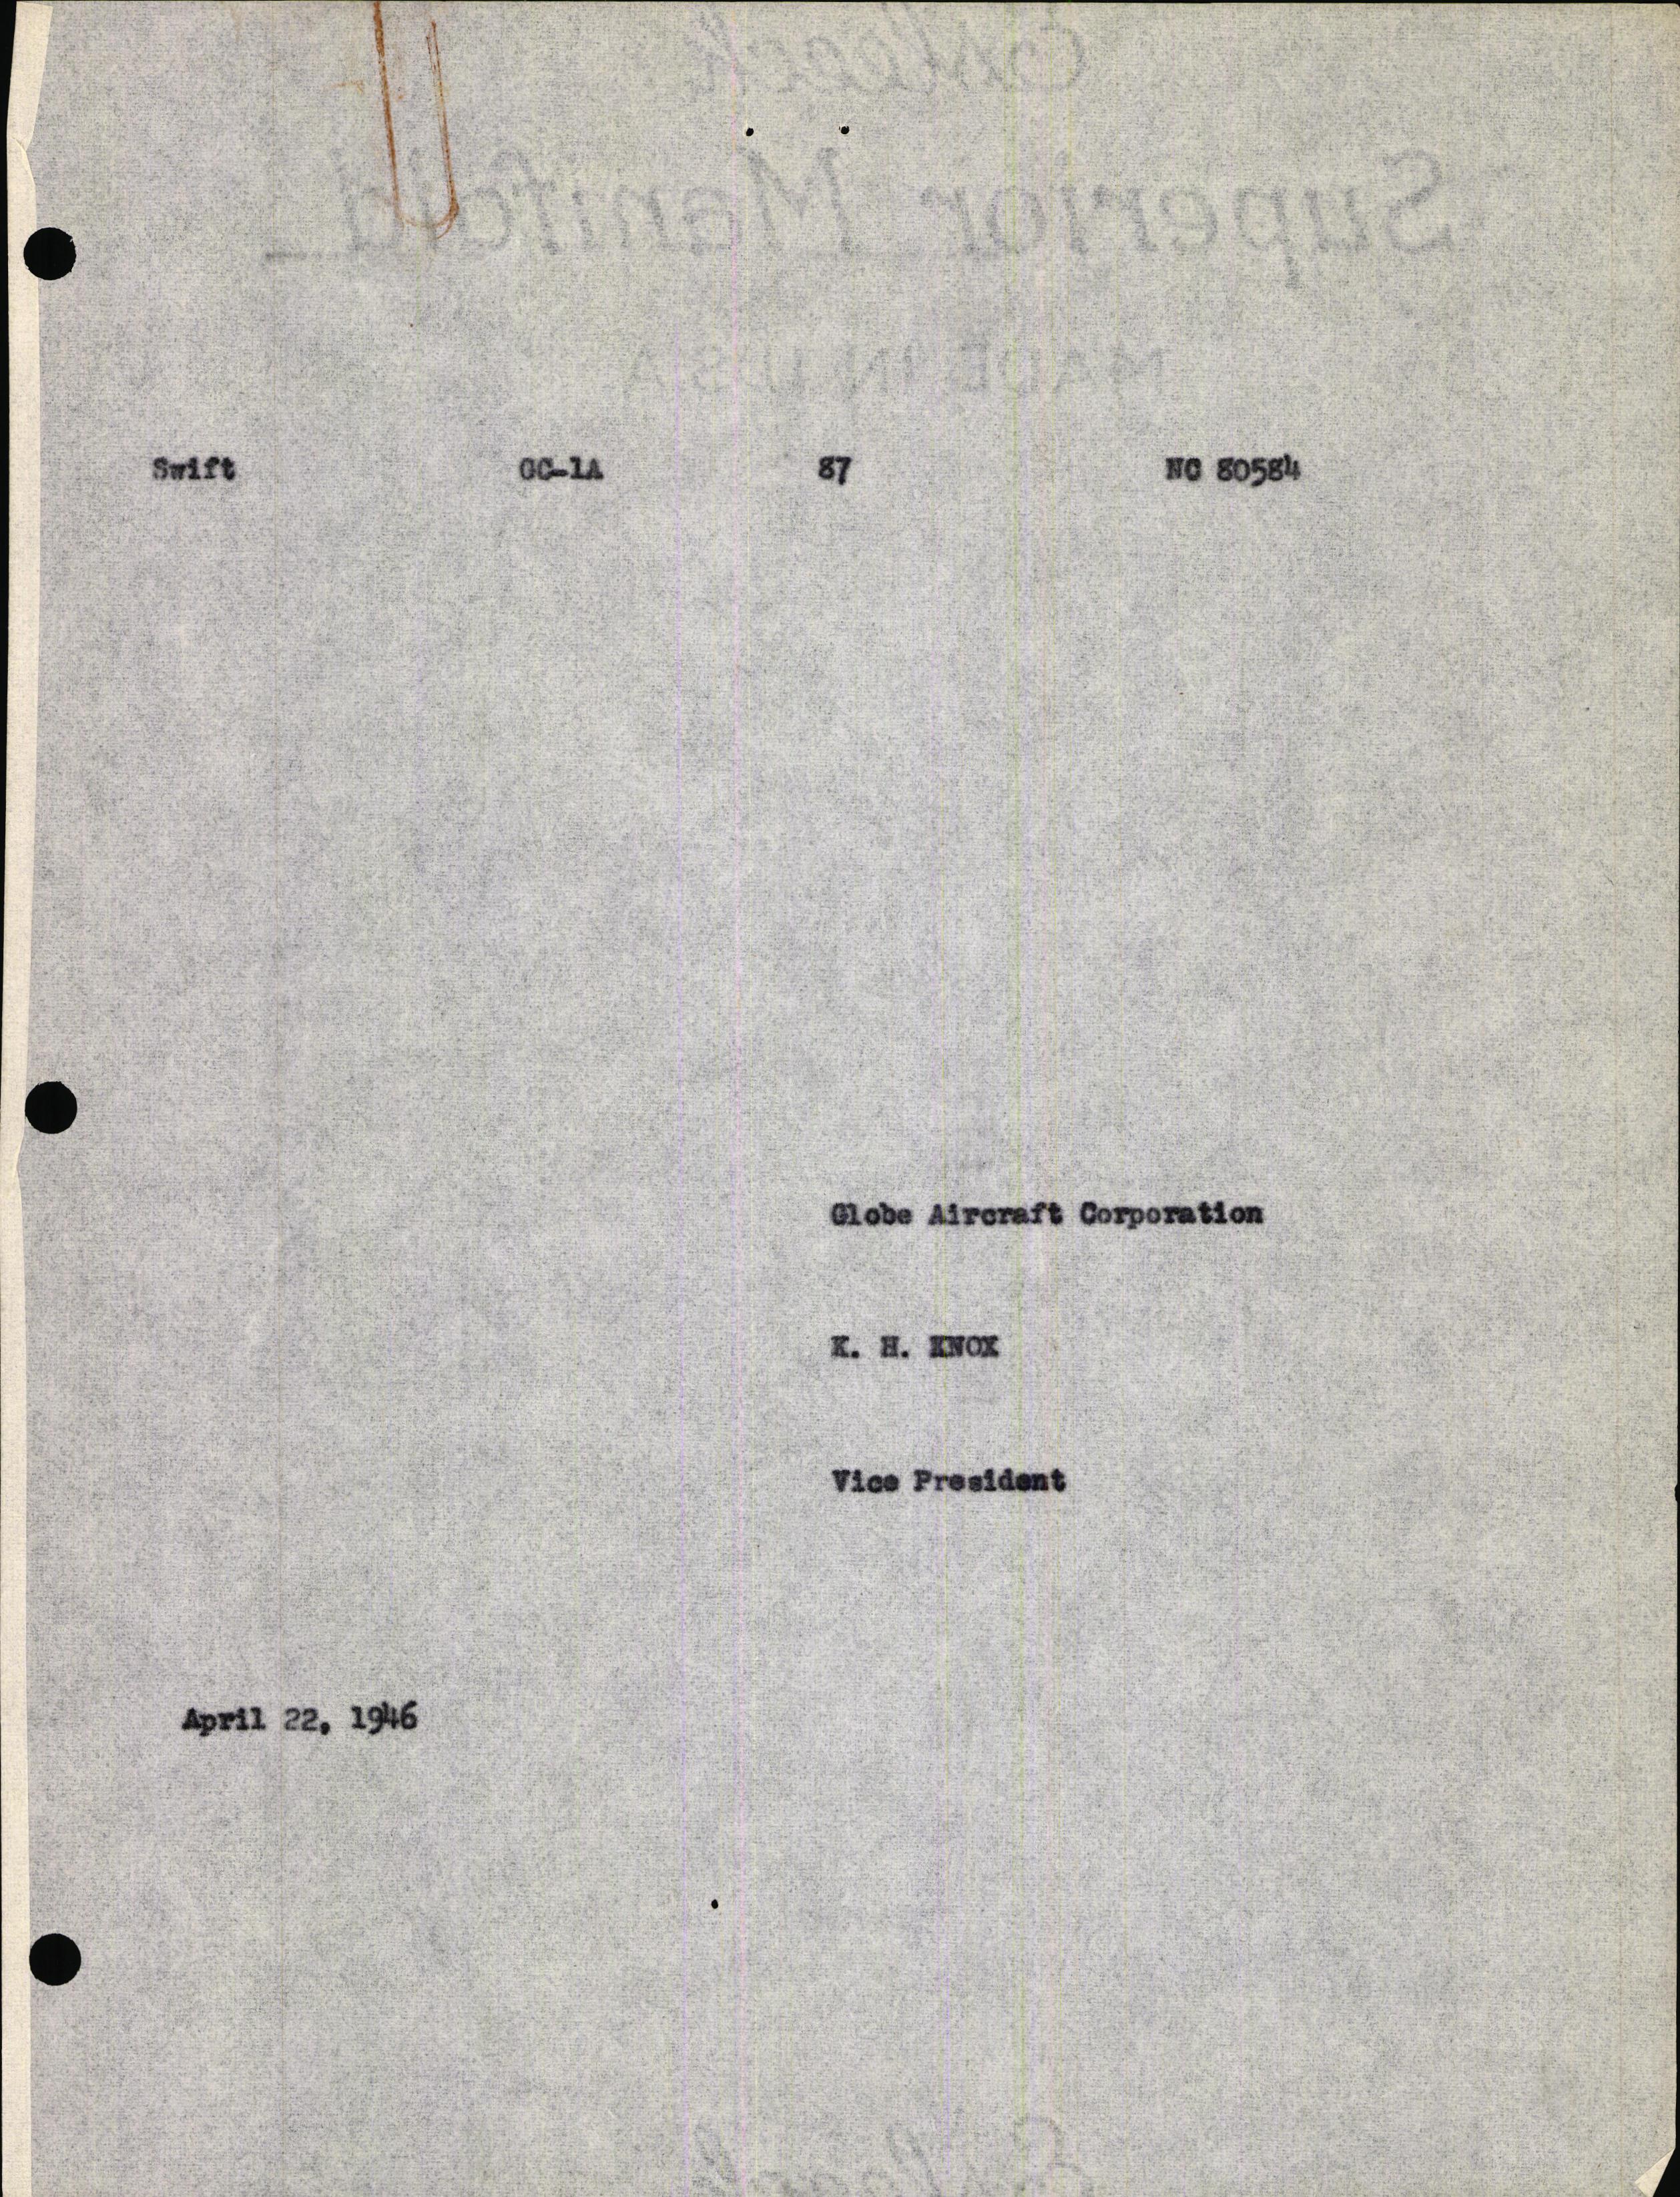 Sample page 9 from AirCorps Library document: Technical Information for Serial Number 87